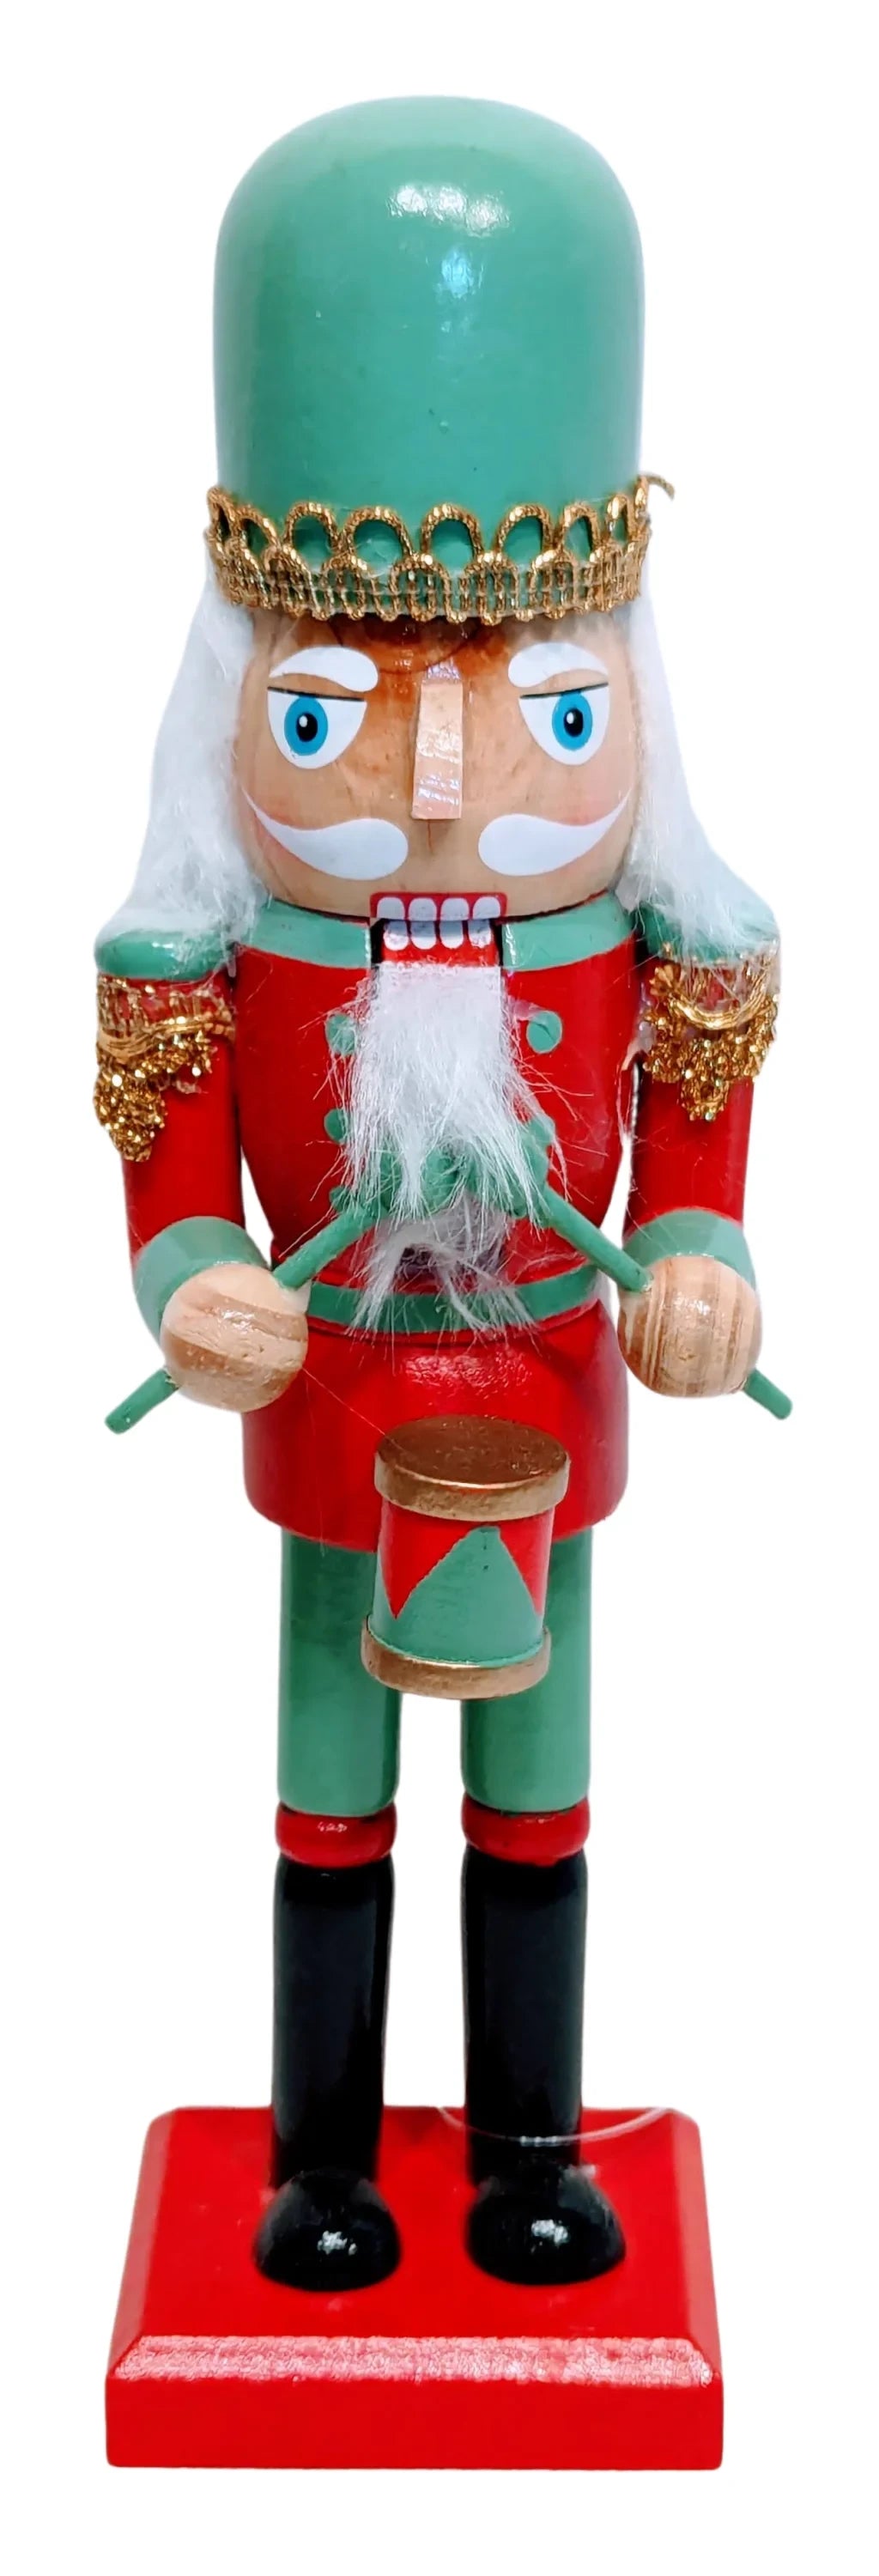 Wooden Retro Green/Red/Gold Nutcracker with Drum